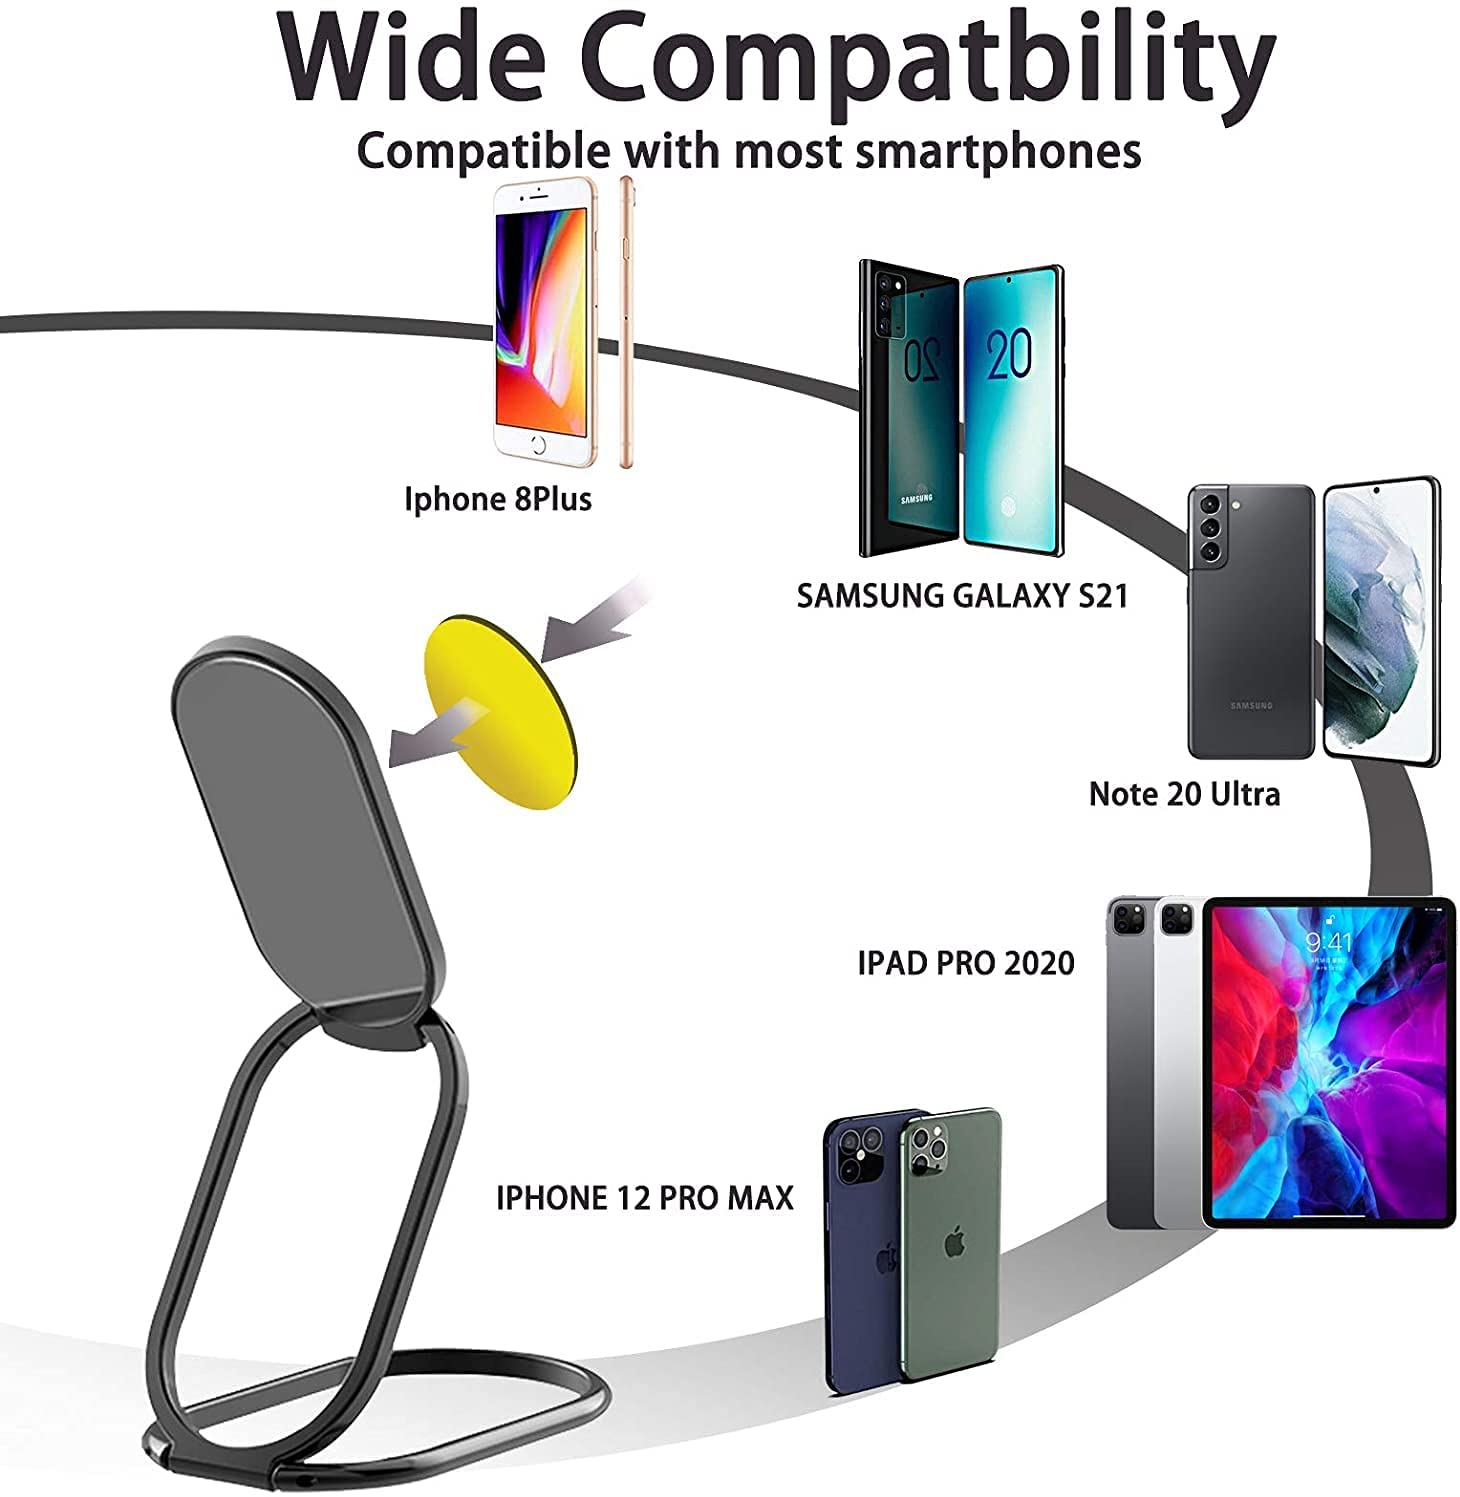 Enhance Your Mobile Experience with the Adjustable Cellphone Stand